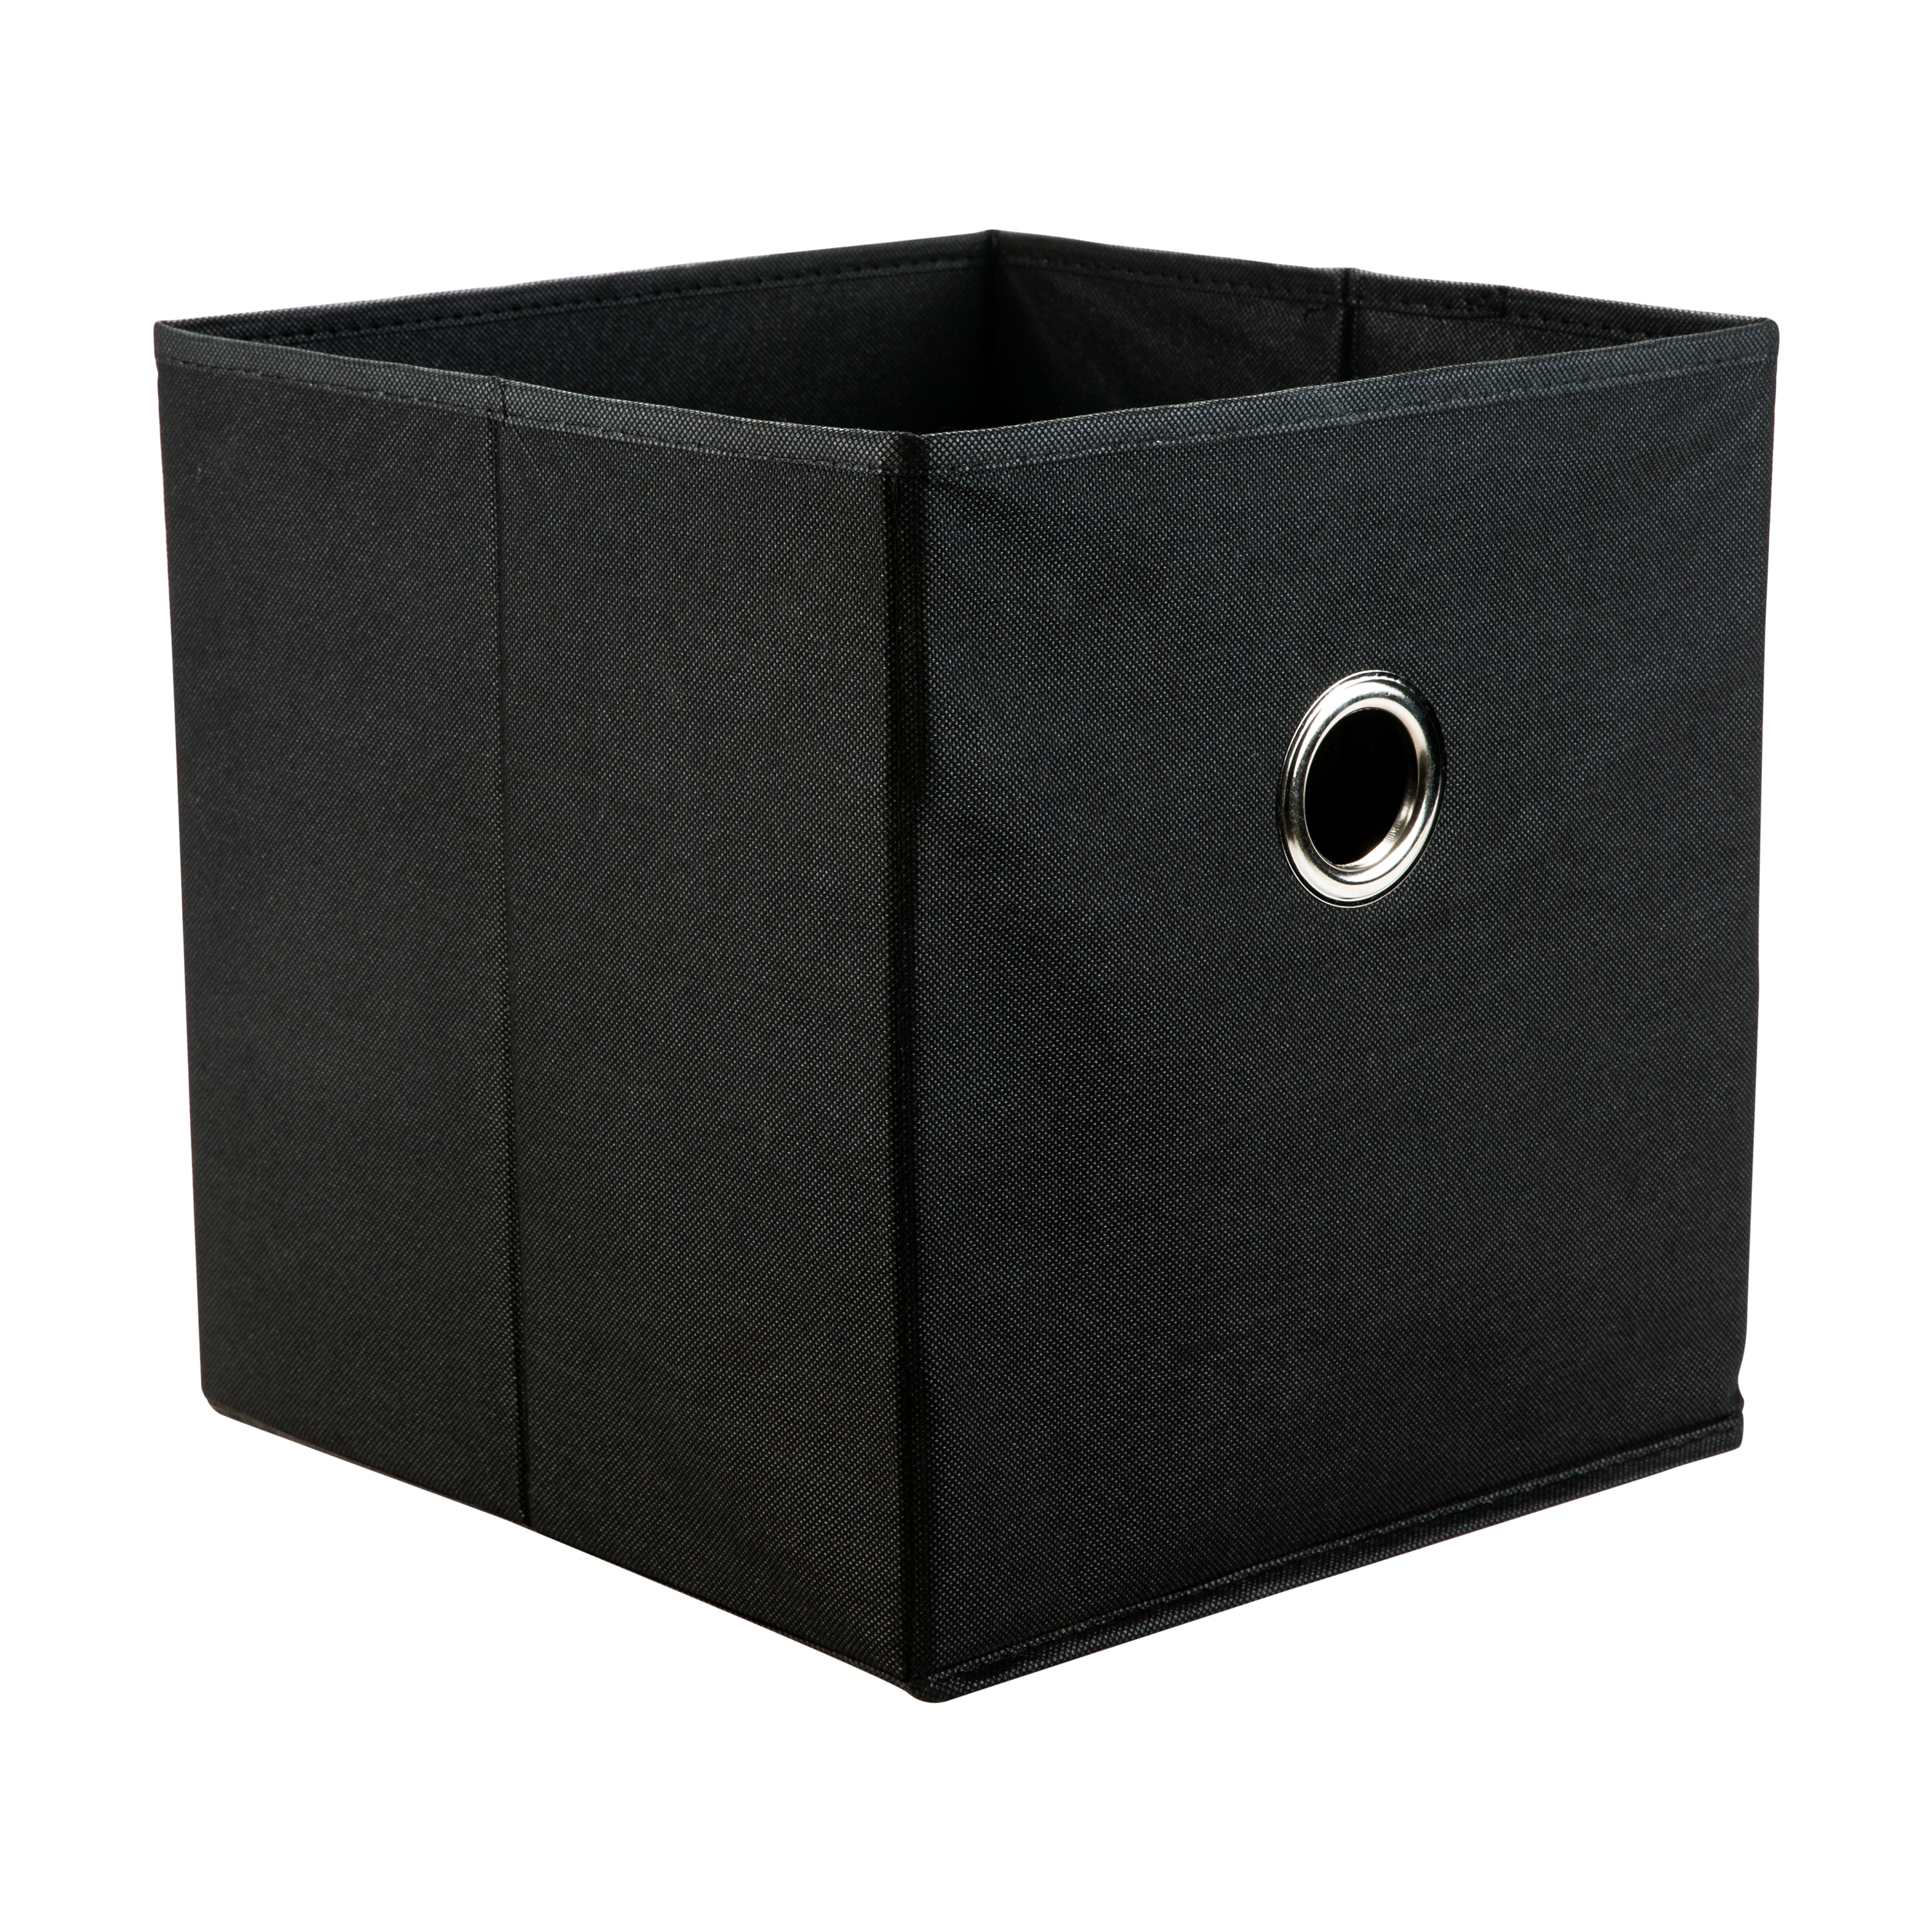 Temary Cube Storage Bins 12x12 Storage Cubes for Shelves Fabric Storage Baskets Cube Baskets for Closet with Leather Handles Cube Storage Organizer